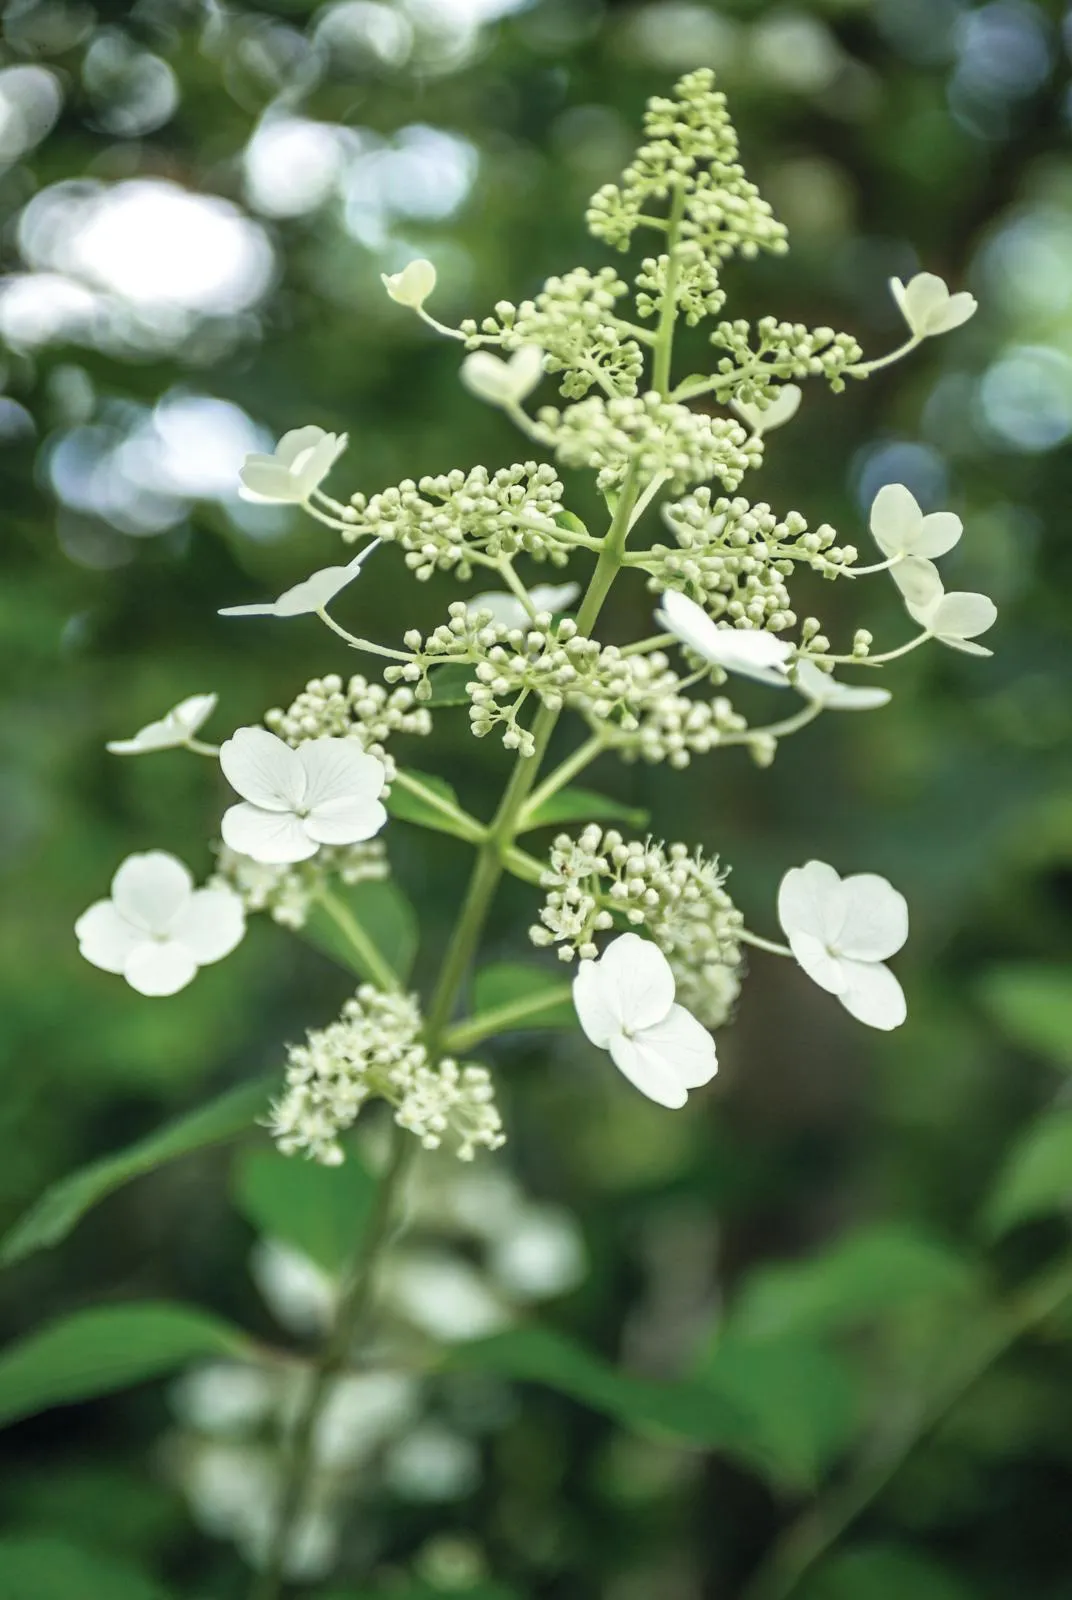 Hydrangea Paniculata 'Kyushu' is an upright deciduous shrub with slightly glossy ovate leaves and creamy-white sterile florets